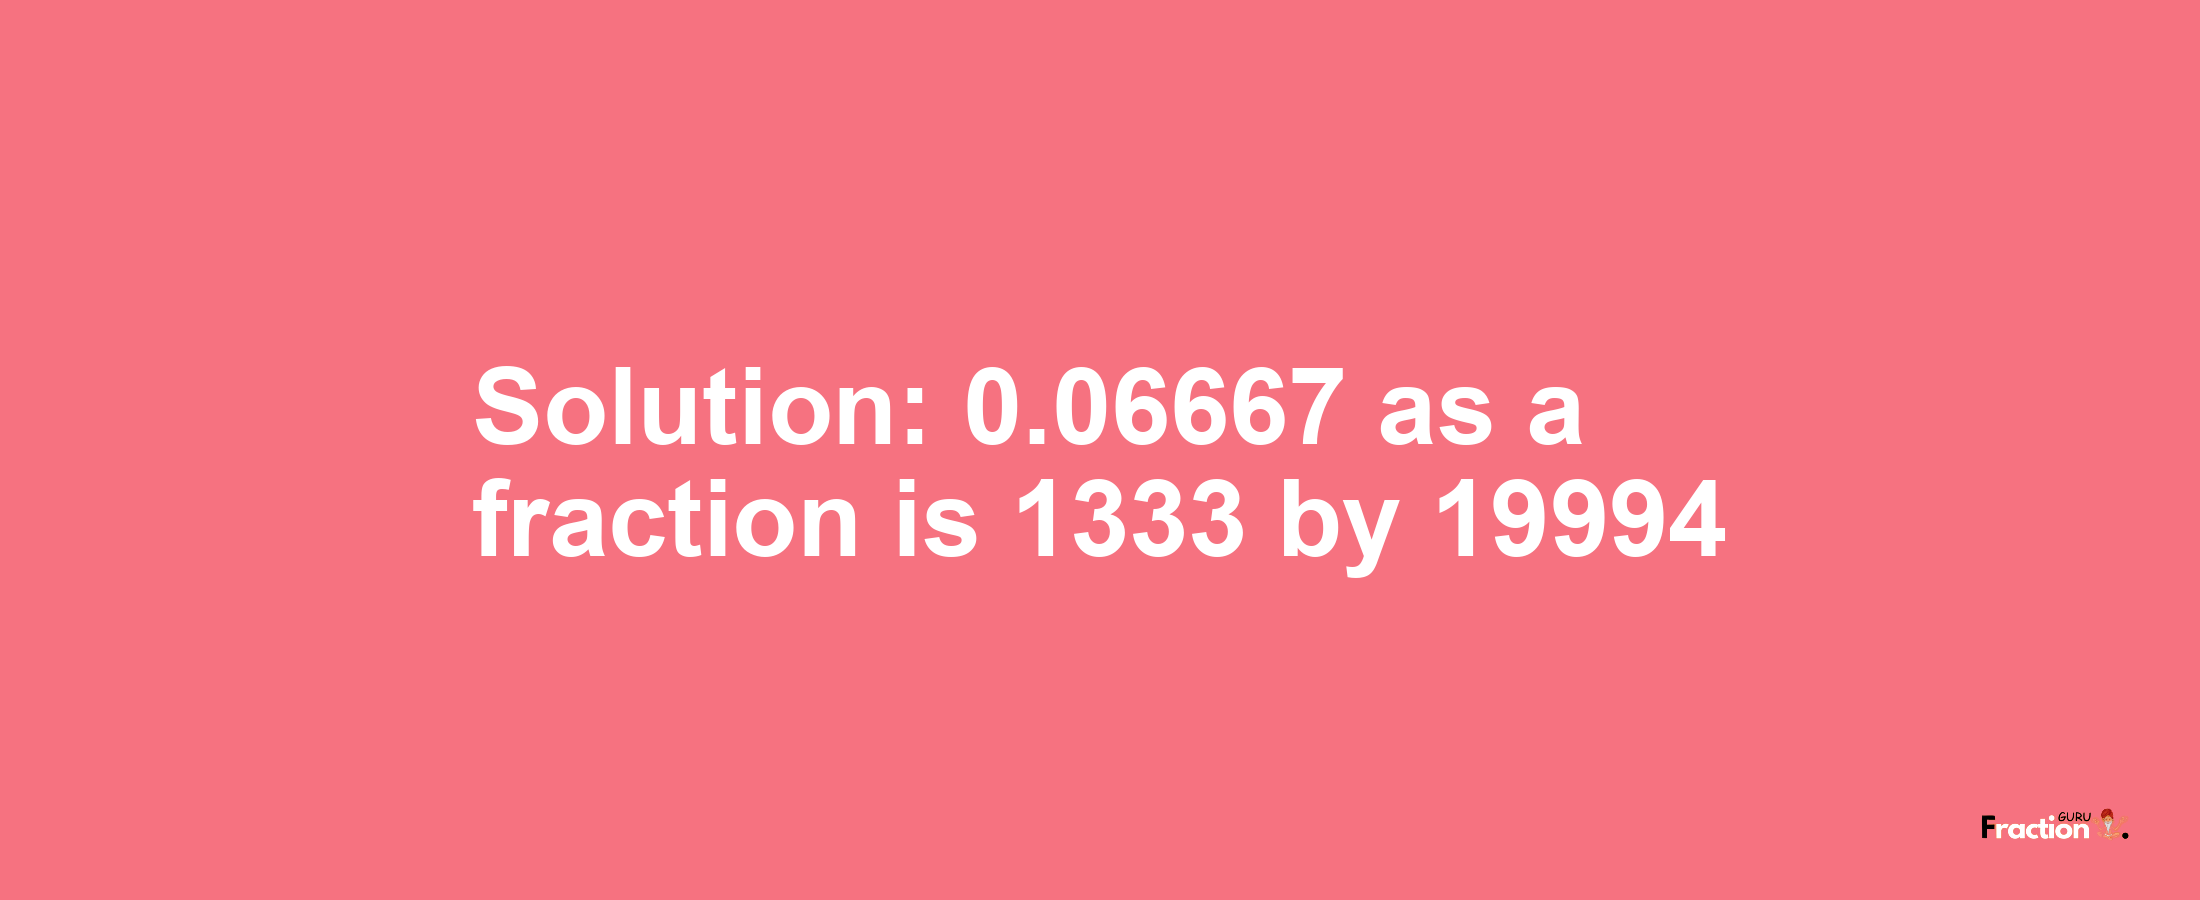 Solution:0.06667 as a fraction is 1333/19994